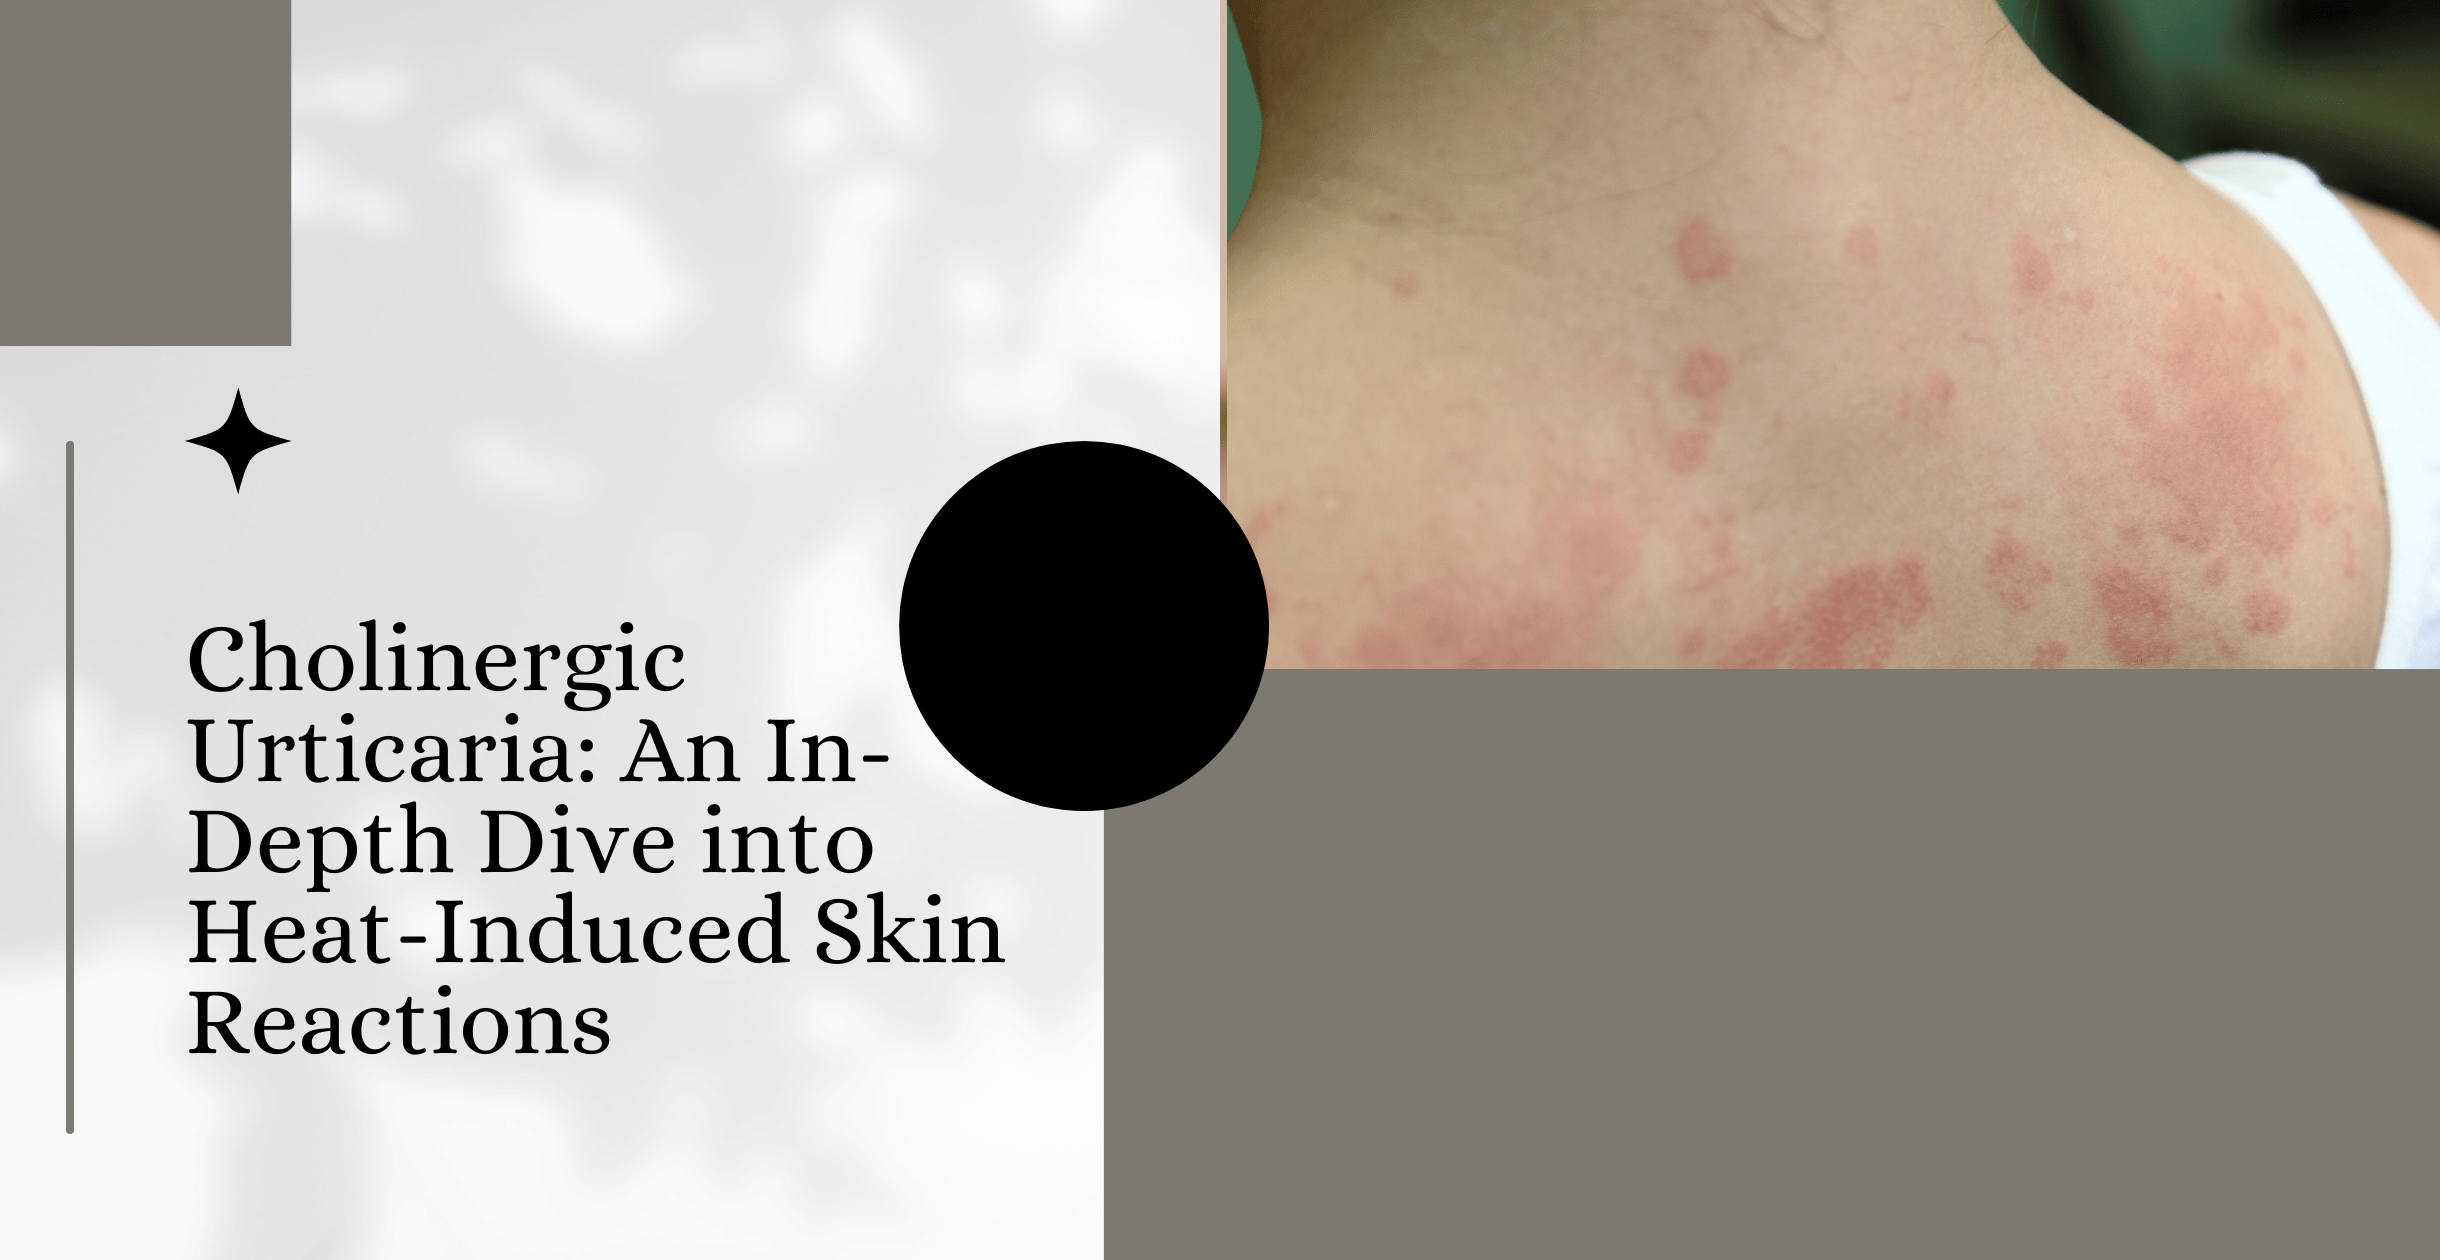 Cholinergic Urticaria: An In-Depth Dive into Heat-Induced Skin Reactions